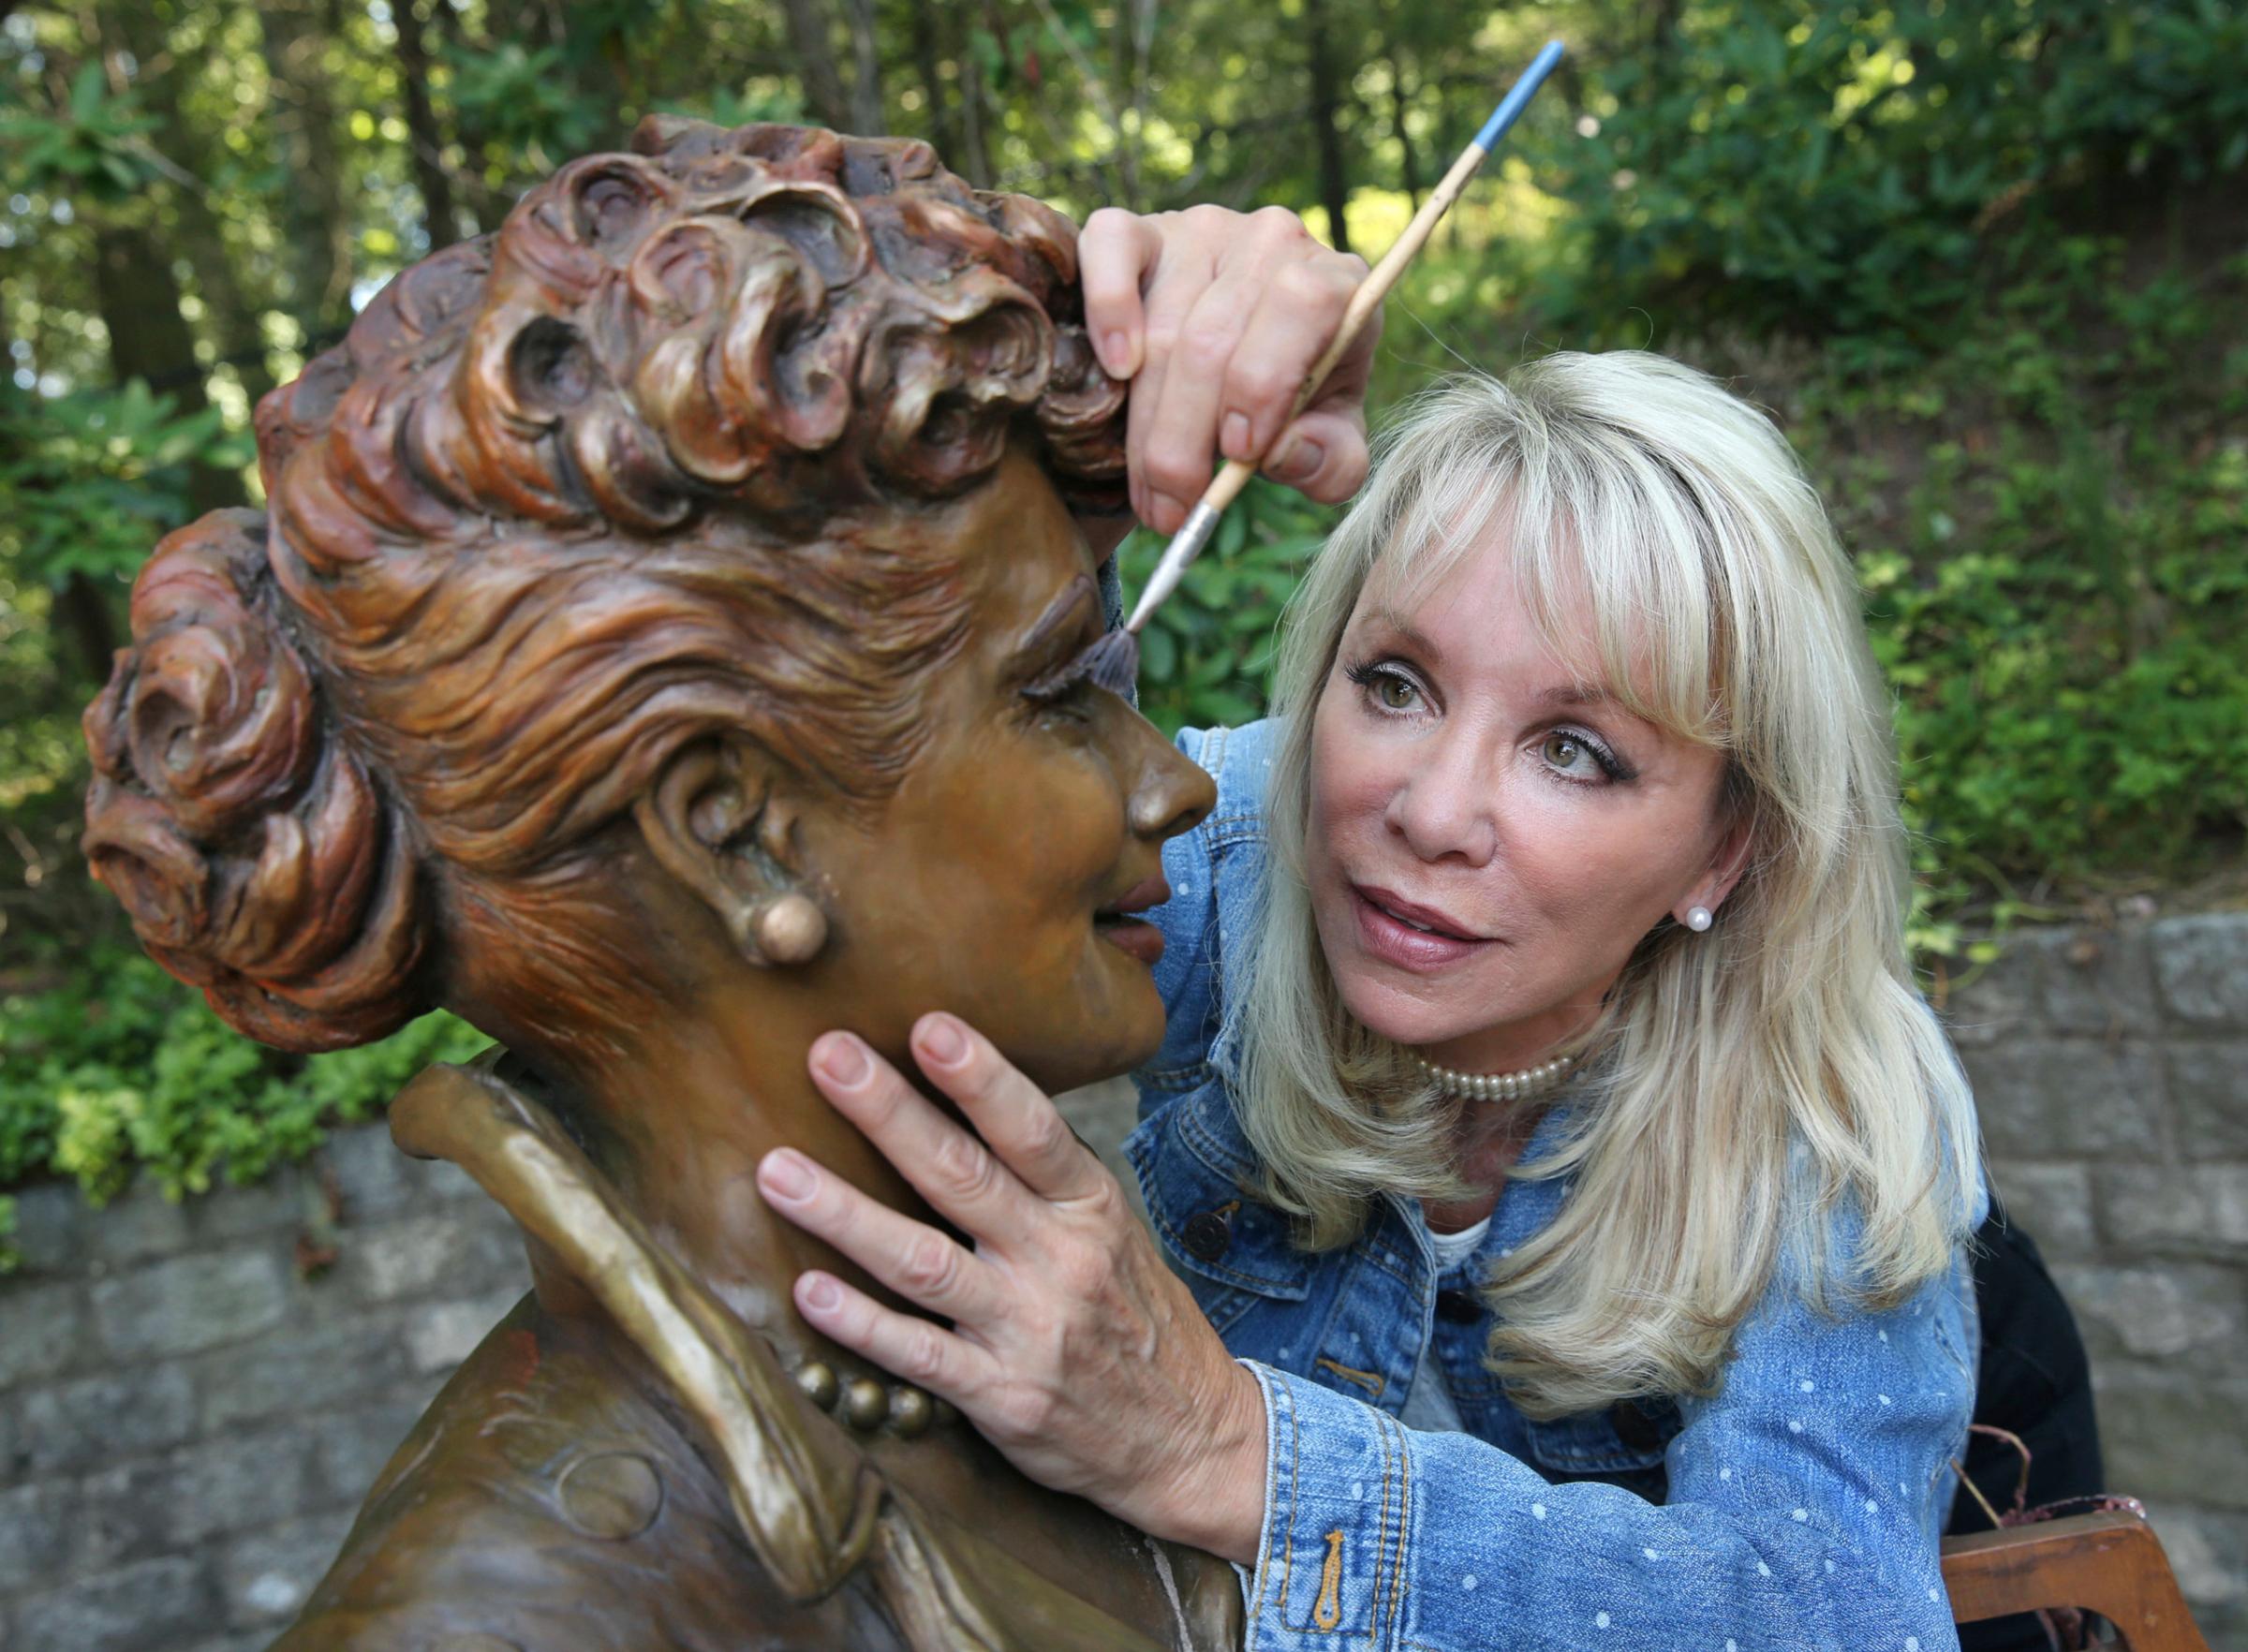 In this Wednesday, July 20, 2016 photo, artist Carolyn Palmer prepares to apply a cold patina to her bronze statue of Lucille Ball in Saddle River, N.J. The sculptor was chosen to create a replacement statue for one dubbed "Scary Lucy," in the late actress Ball's hometown. The much-maligned statue of Ball will be replaced after it drew worldwide attention as "Scary Lucy," according to the mayor of the western New York village where the 1950s sitcom actress and comedian grew up and her life-size bronze has stood since 2009. (AP Photo/Mel Evans)